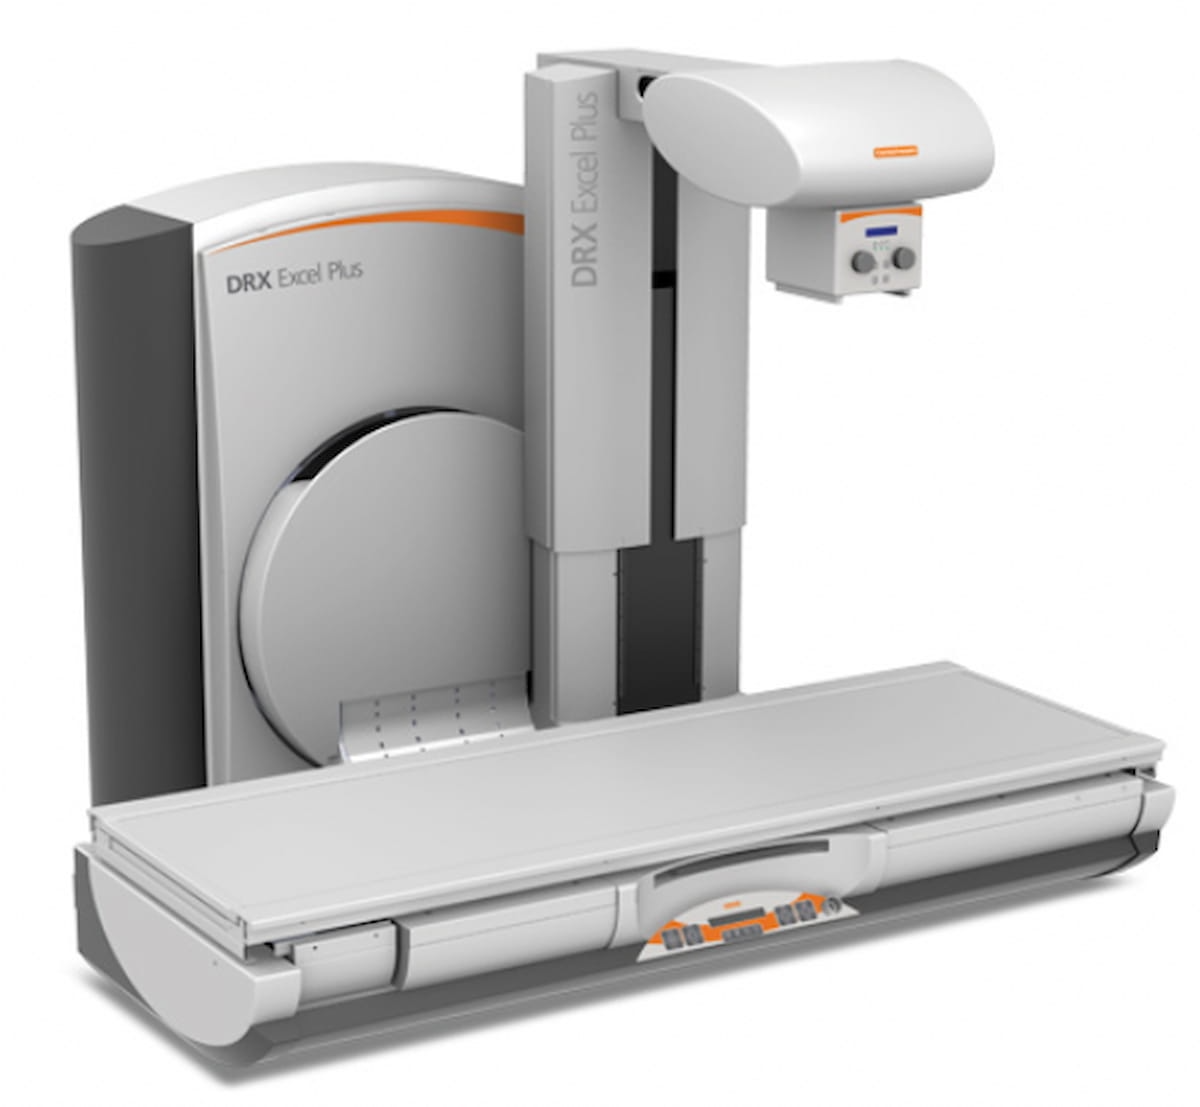 New X-Ray System Offers Features to Enhance Radiology Workflows